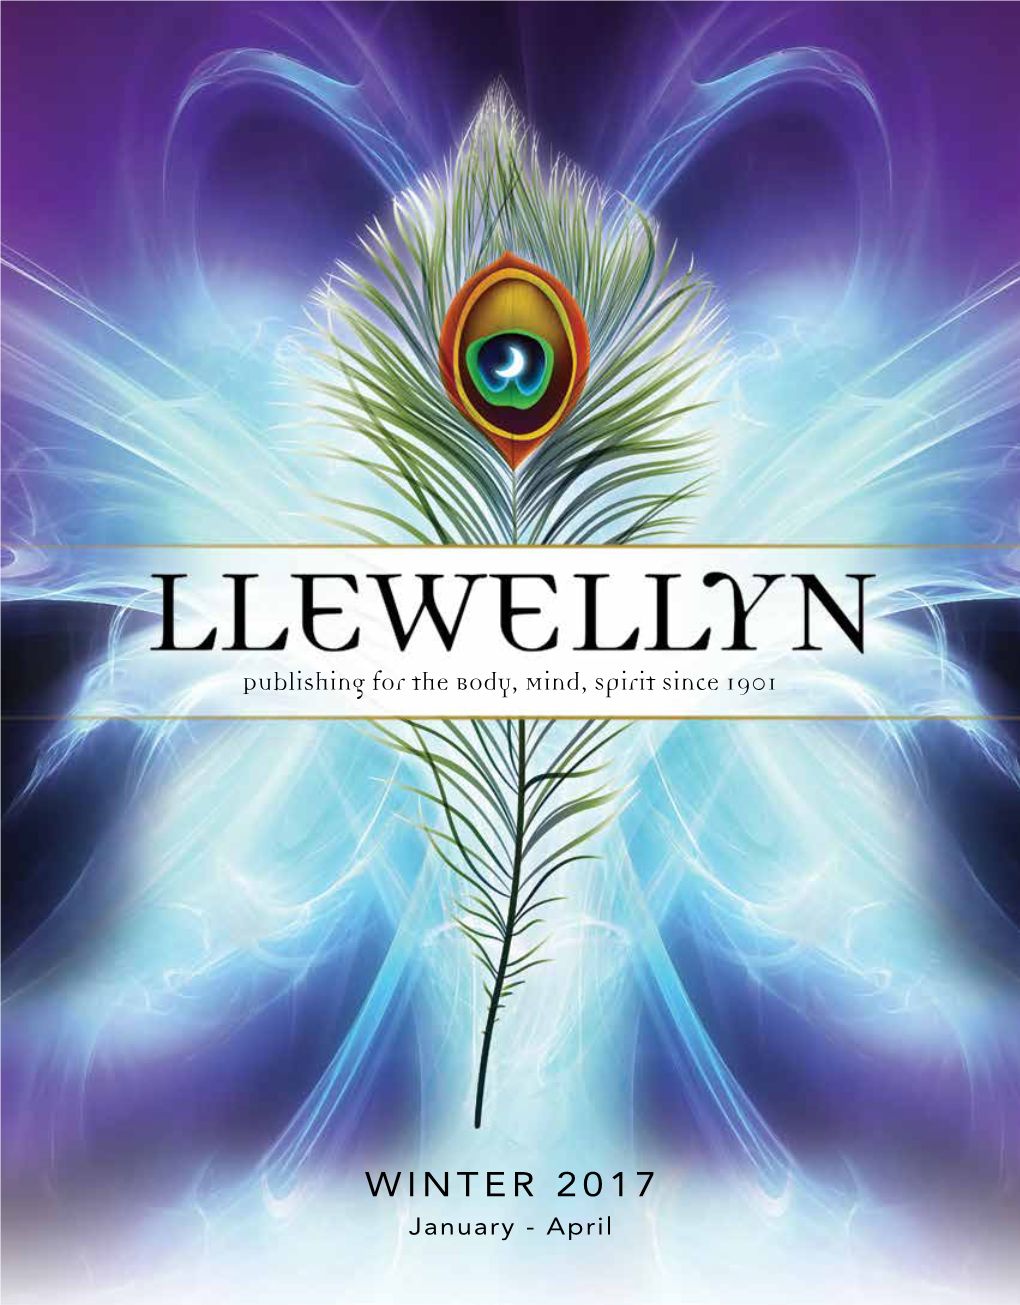 Download the Winter 2017 Llewellyn Catalog in PDF Format